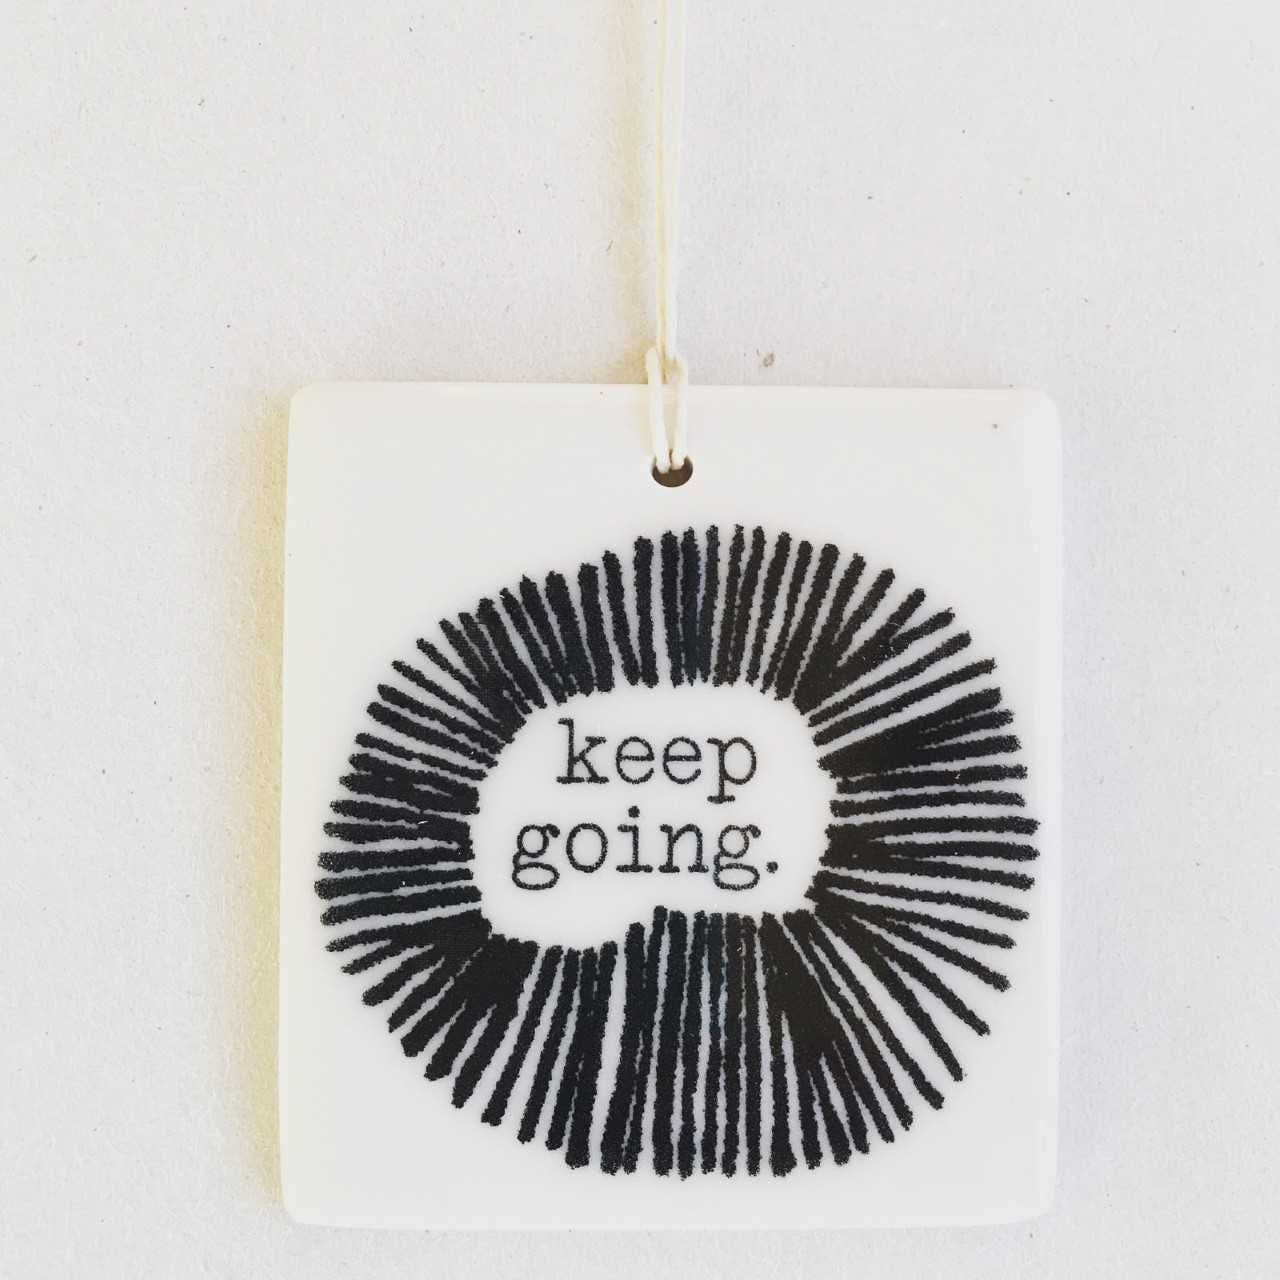 keep going | ceramic wall tag | ceramic wall tile | screenprinted ceramics | encouragement | don't give up | gift for student